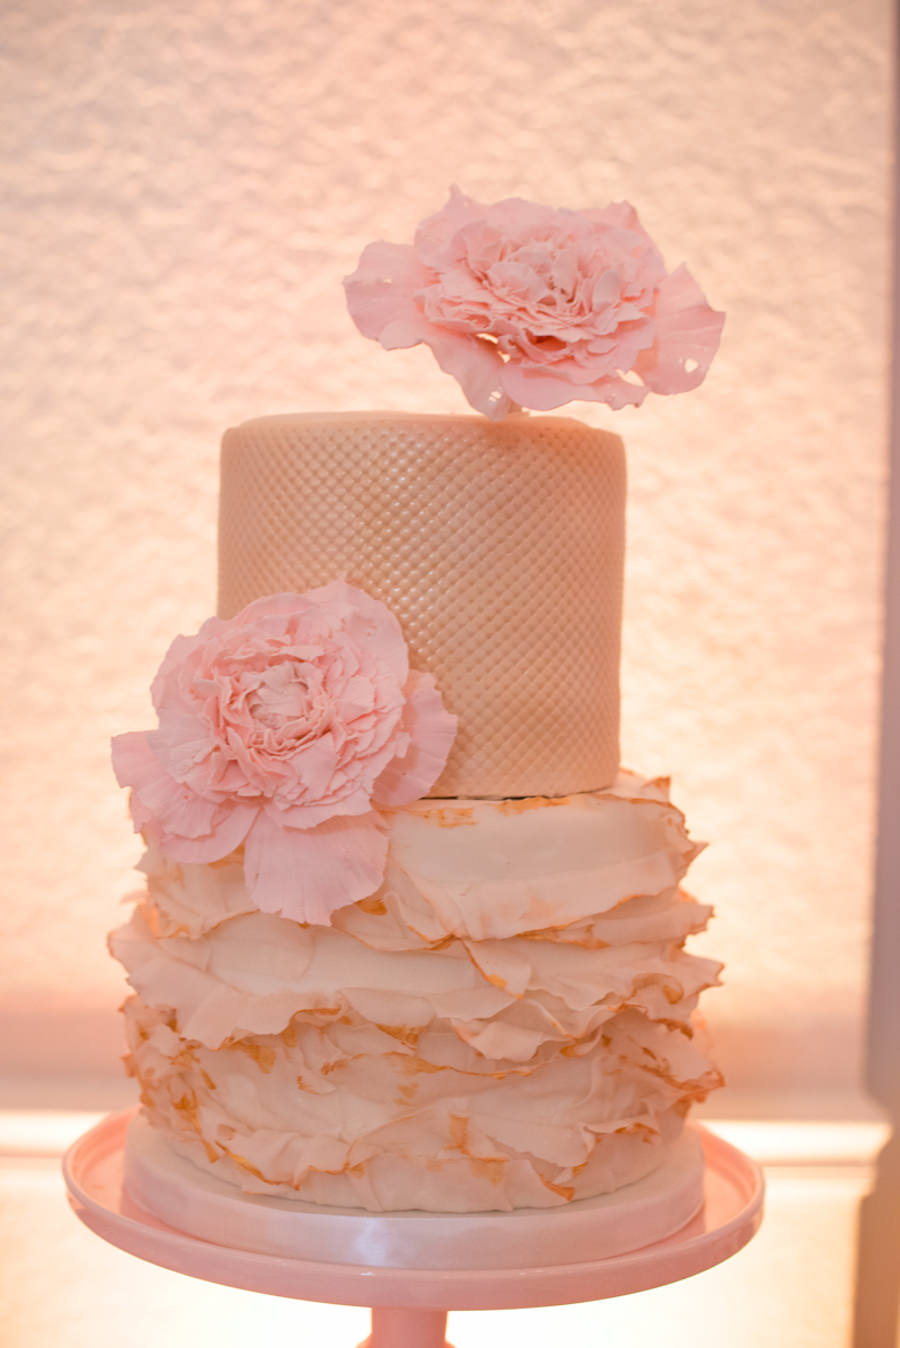 Two Tier Blush Pink Wedding Cake with Ruffled Icing and Blush Roses | Bride and Groom Wedding Sparkler Exit at St. Pete Wedding Venue The Sirata | St. Petersburg Wedding Photographer Castorina Photography